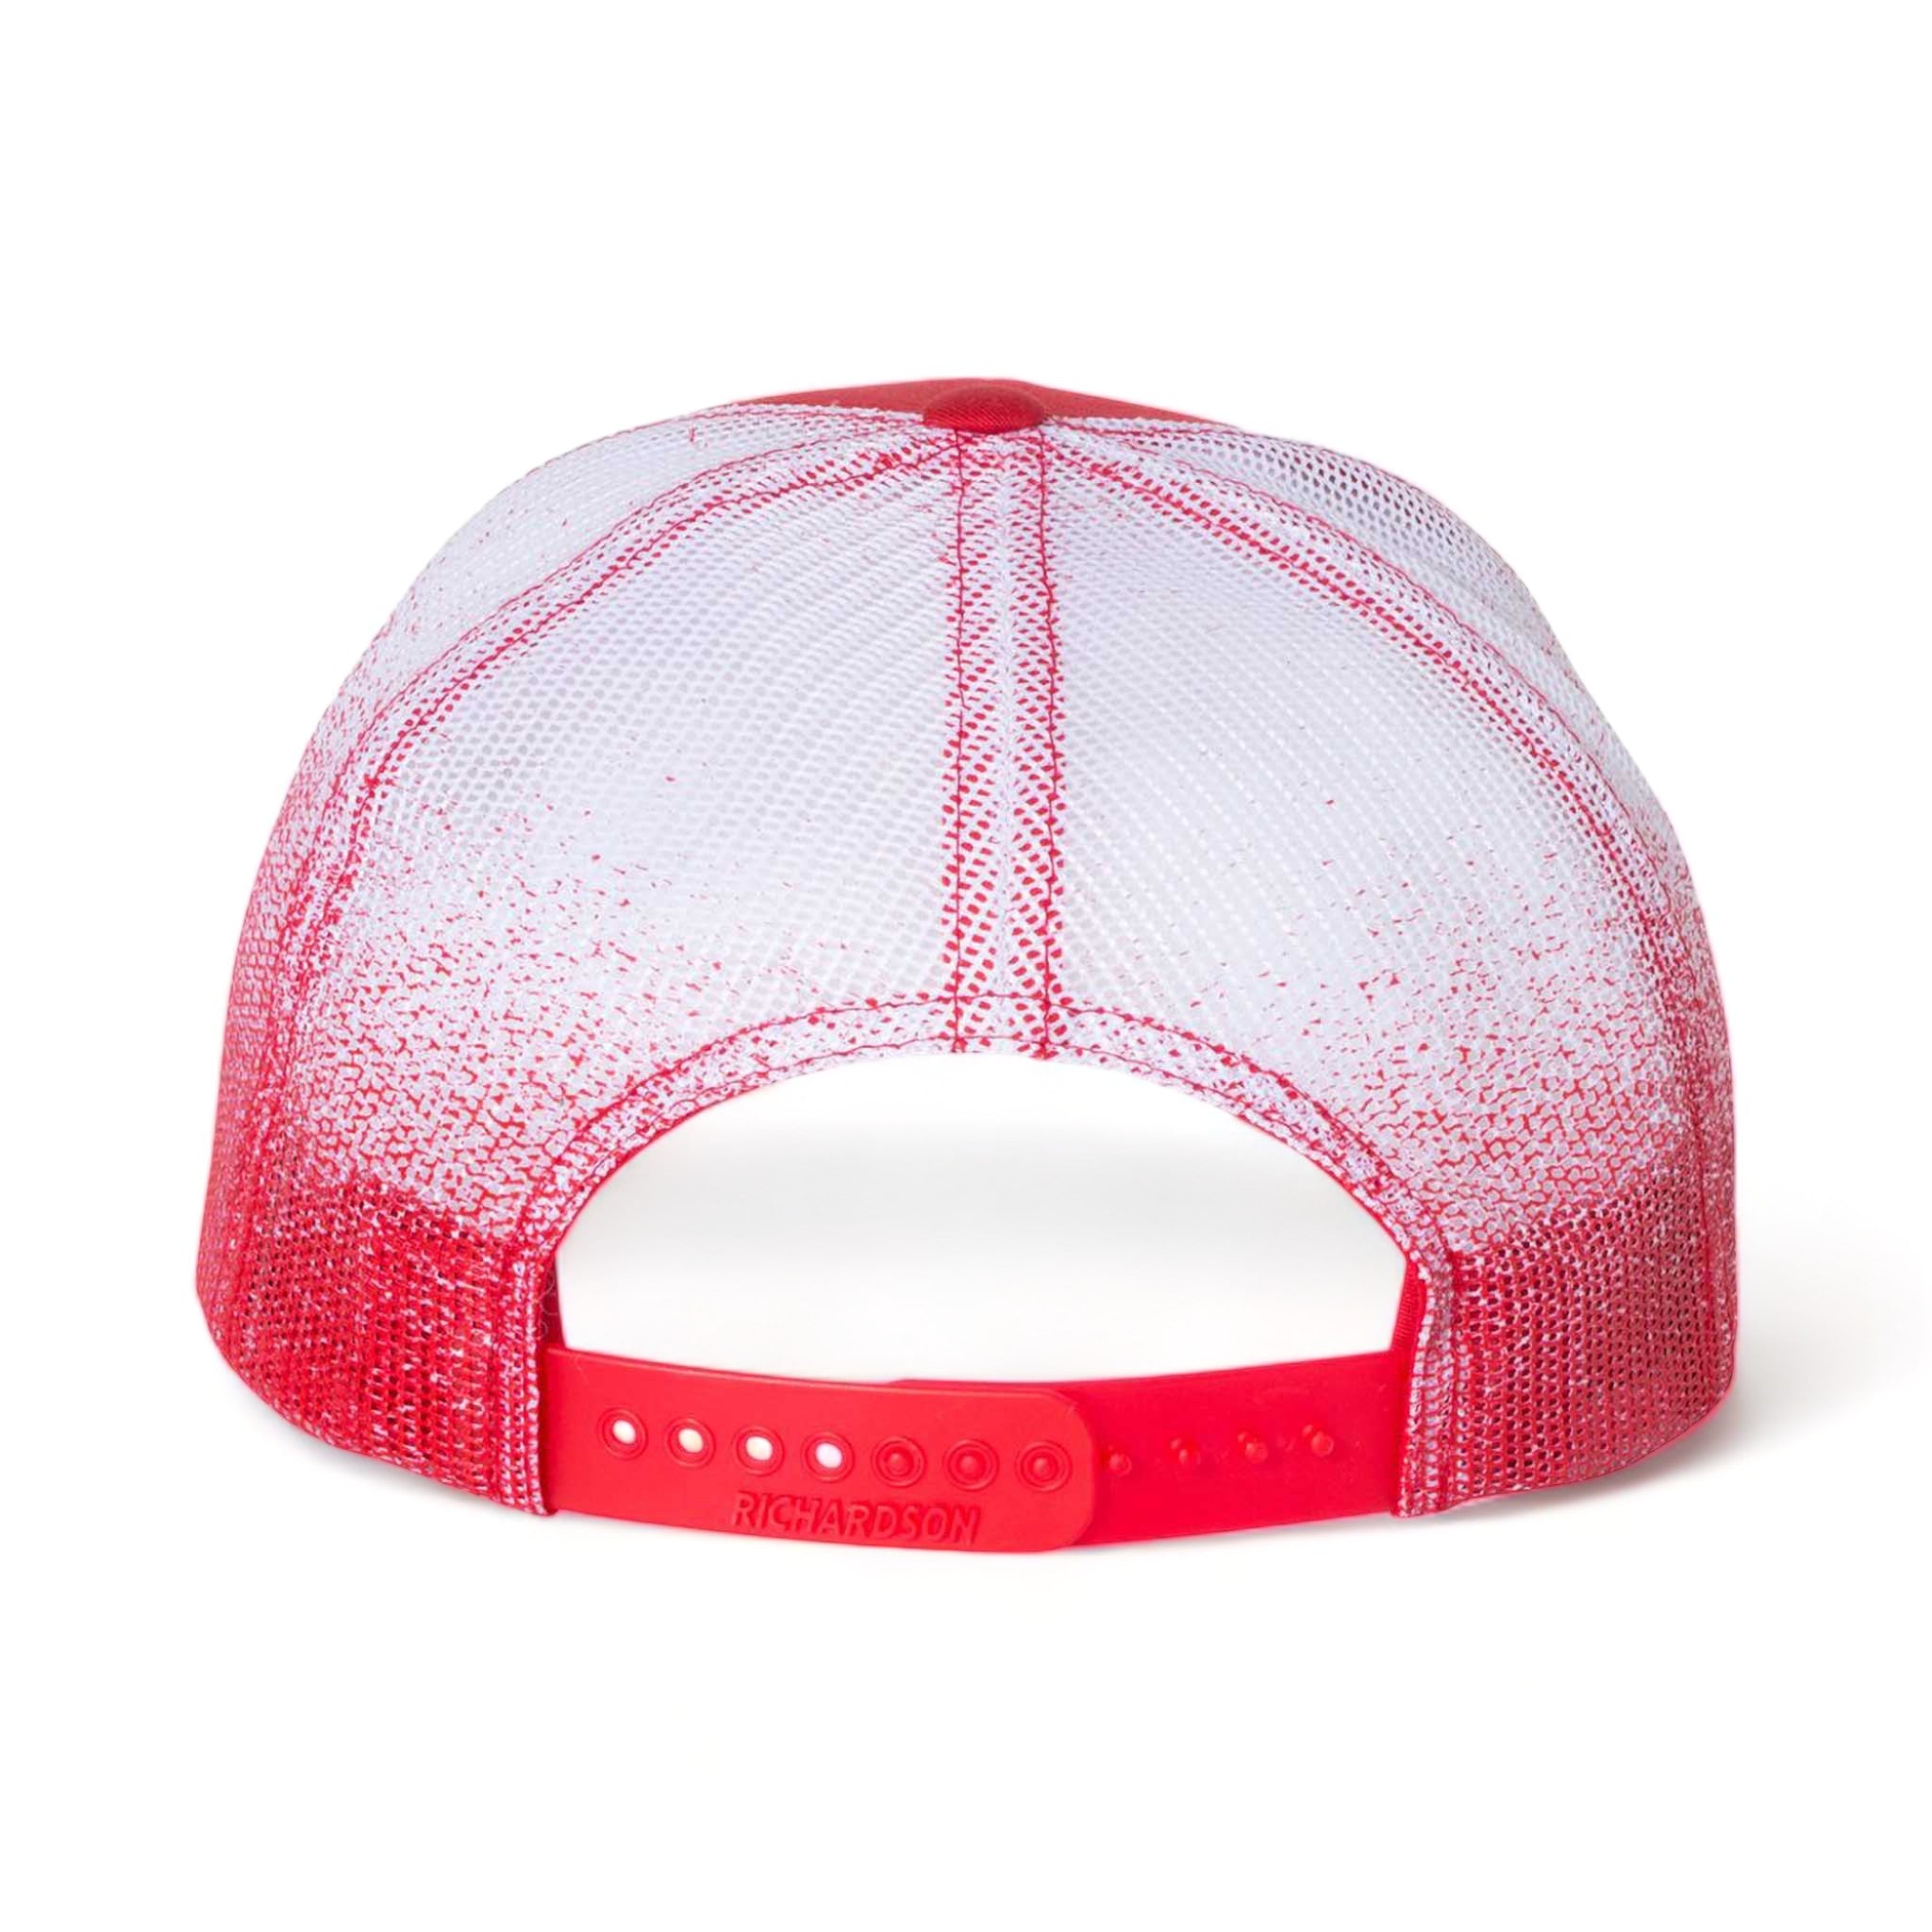 Back view of Richardson 112PM custom hat in red and red to white fade